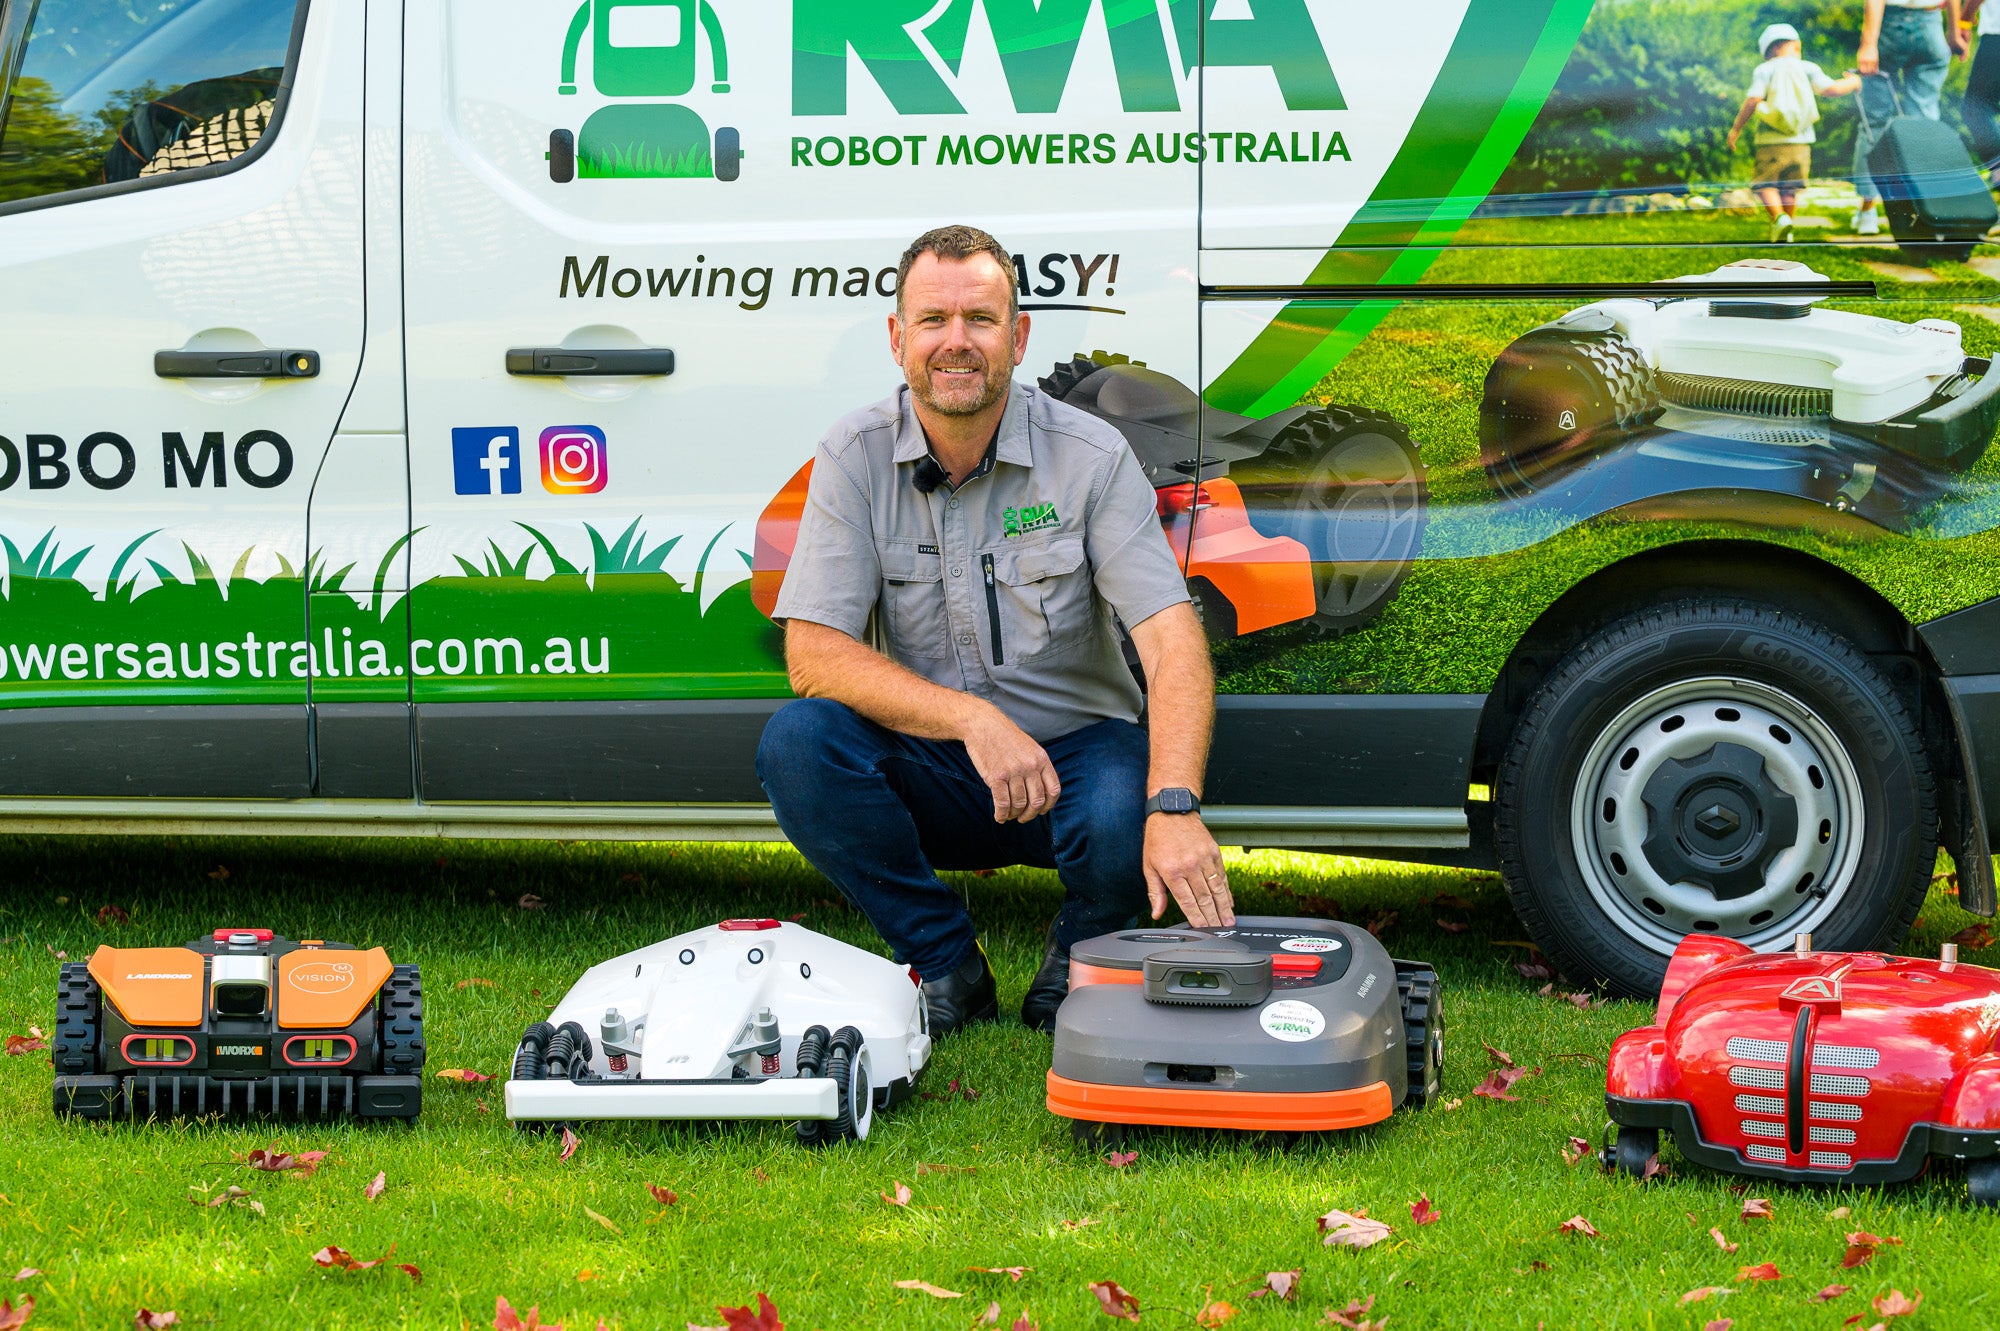 Load video: Robot Mowers Australia brand introduction and buying guidevideo